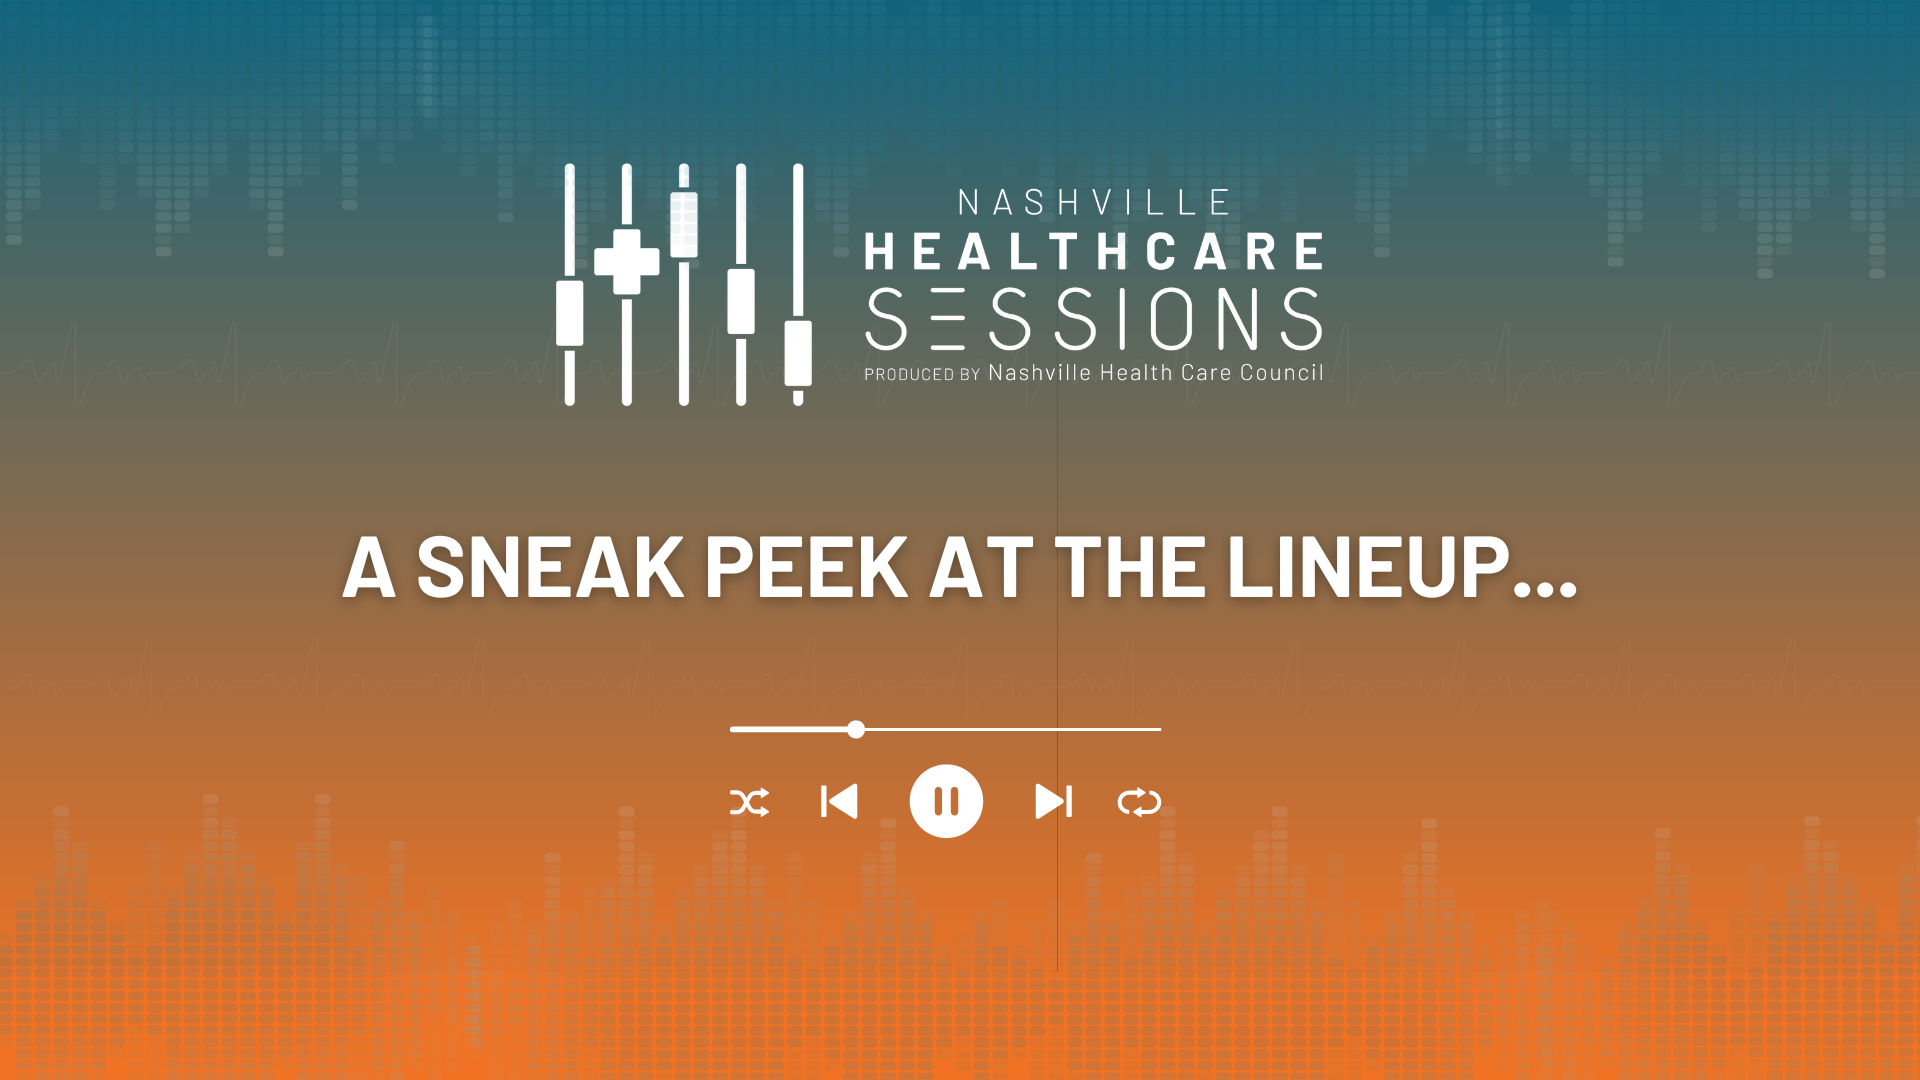 A glimpse of the Sessions conference speaker lineup, showcasing a sneak peek of what's to come.